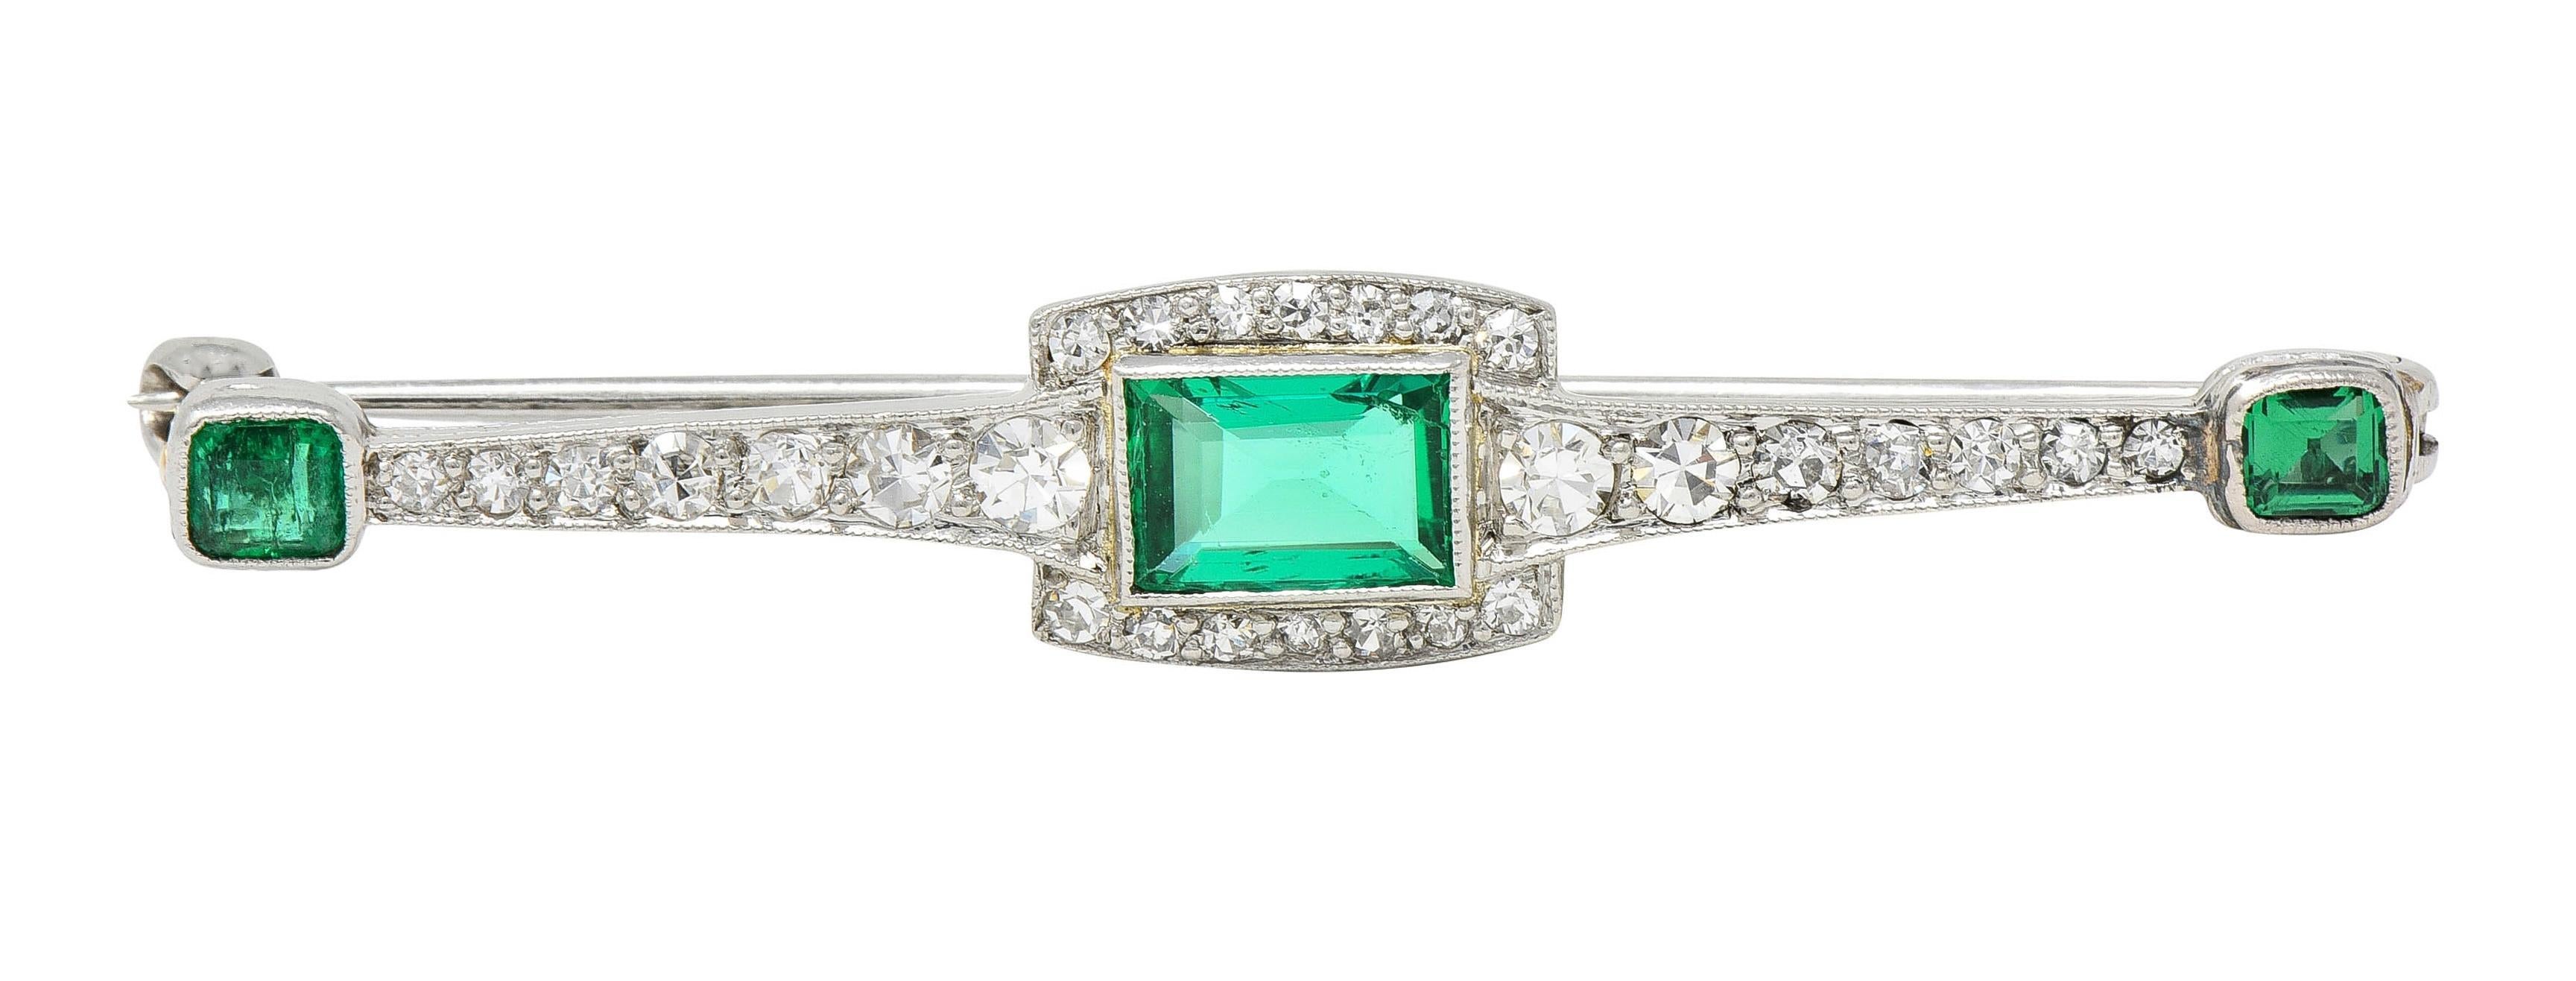 Designed as a tapered bar-style brooch centering a bezel set rectangular step-cut emerald 
Weighing approximately 0.79 carat - transparent medium green in color
With old single cut diamonds bead set as halo and throughout bar
Weighing approximately